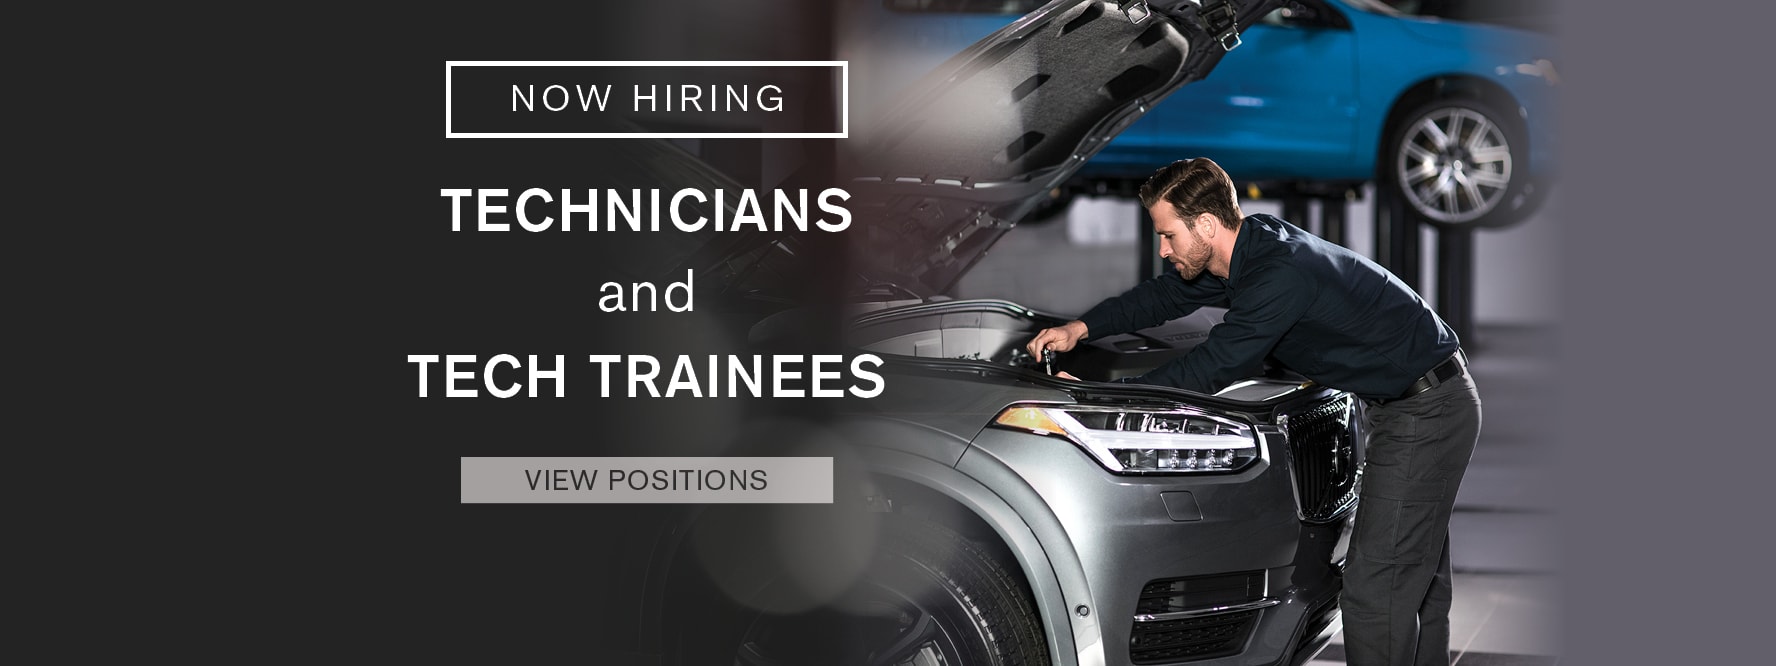 Now Hiring Technicians and Tech Trainees